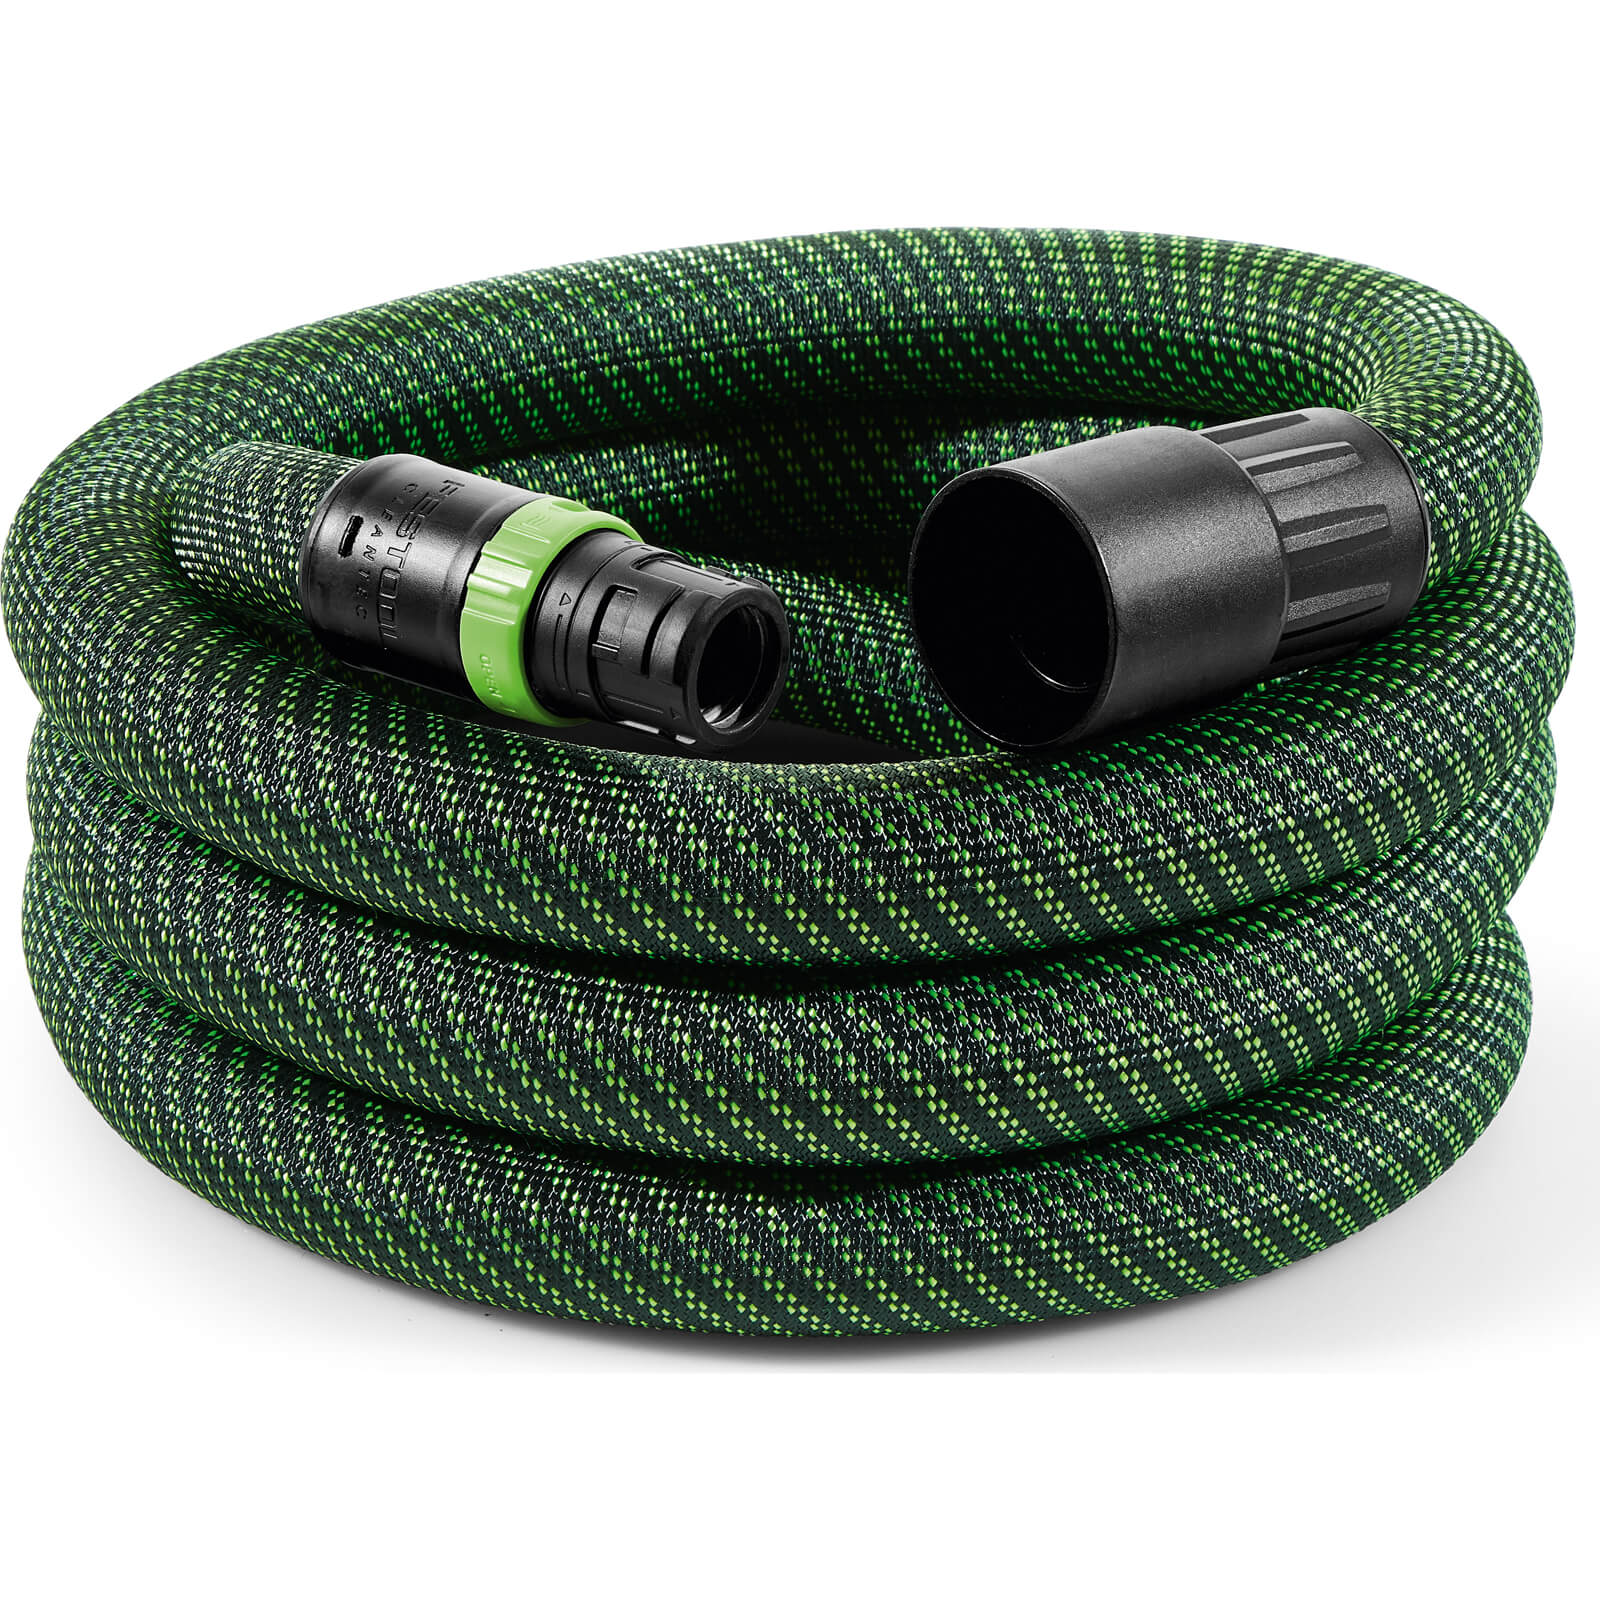 Image of Festool AS/CTR Replacement Suction Hose for Dust Extractors 5m